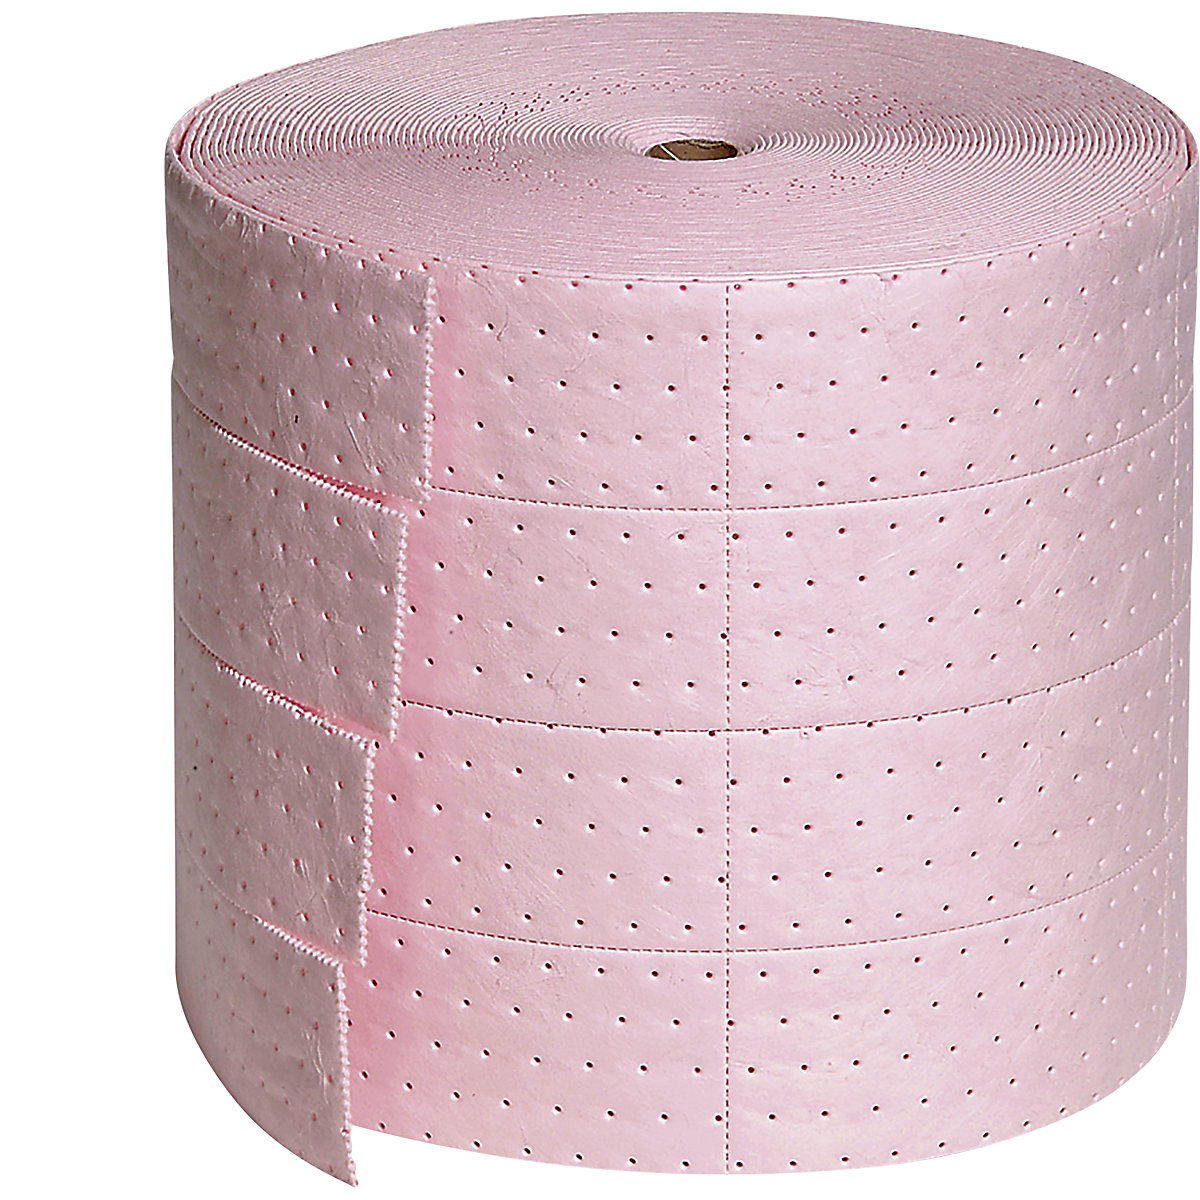 RIP-&-FIT® HazMat absorbent sheeting roll for chemicals - PIG